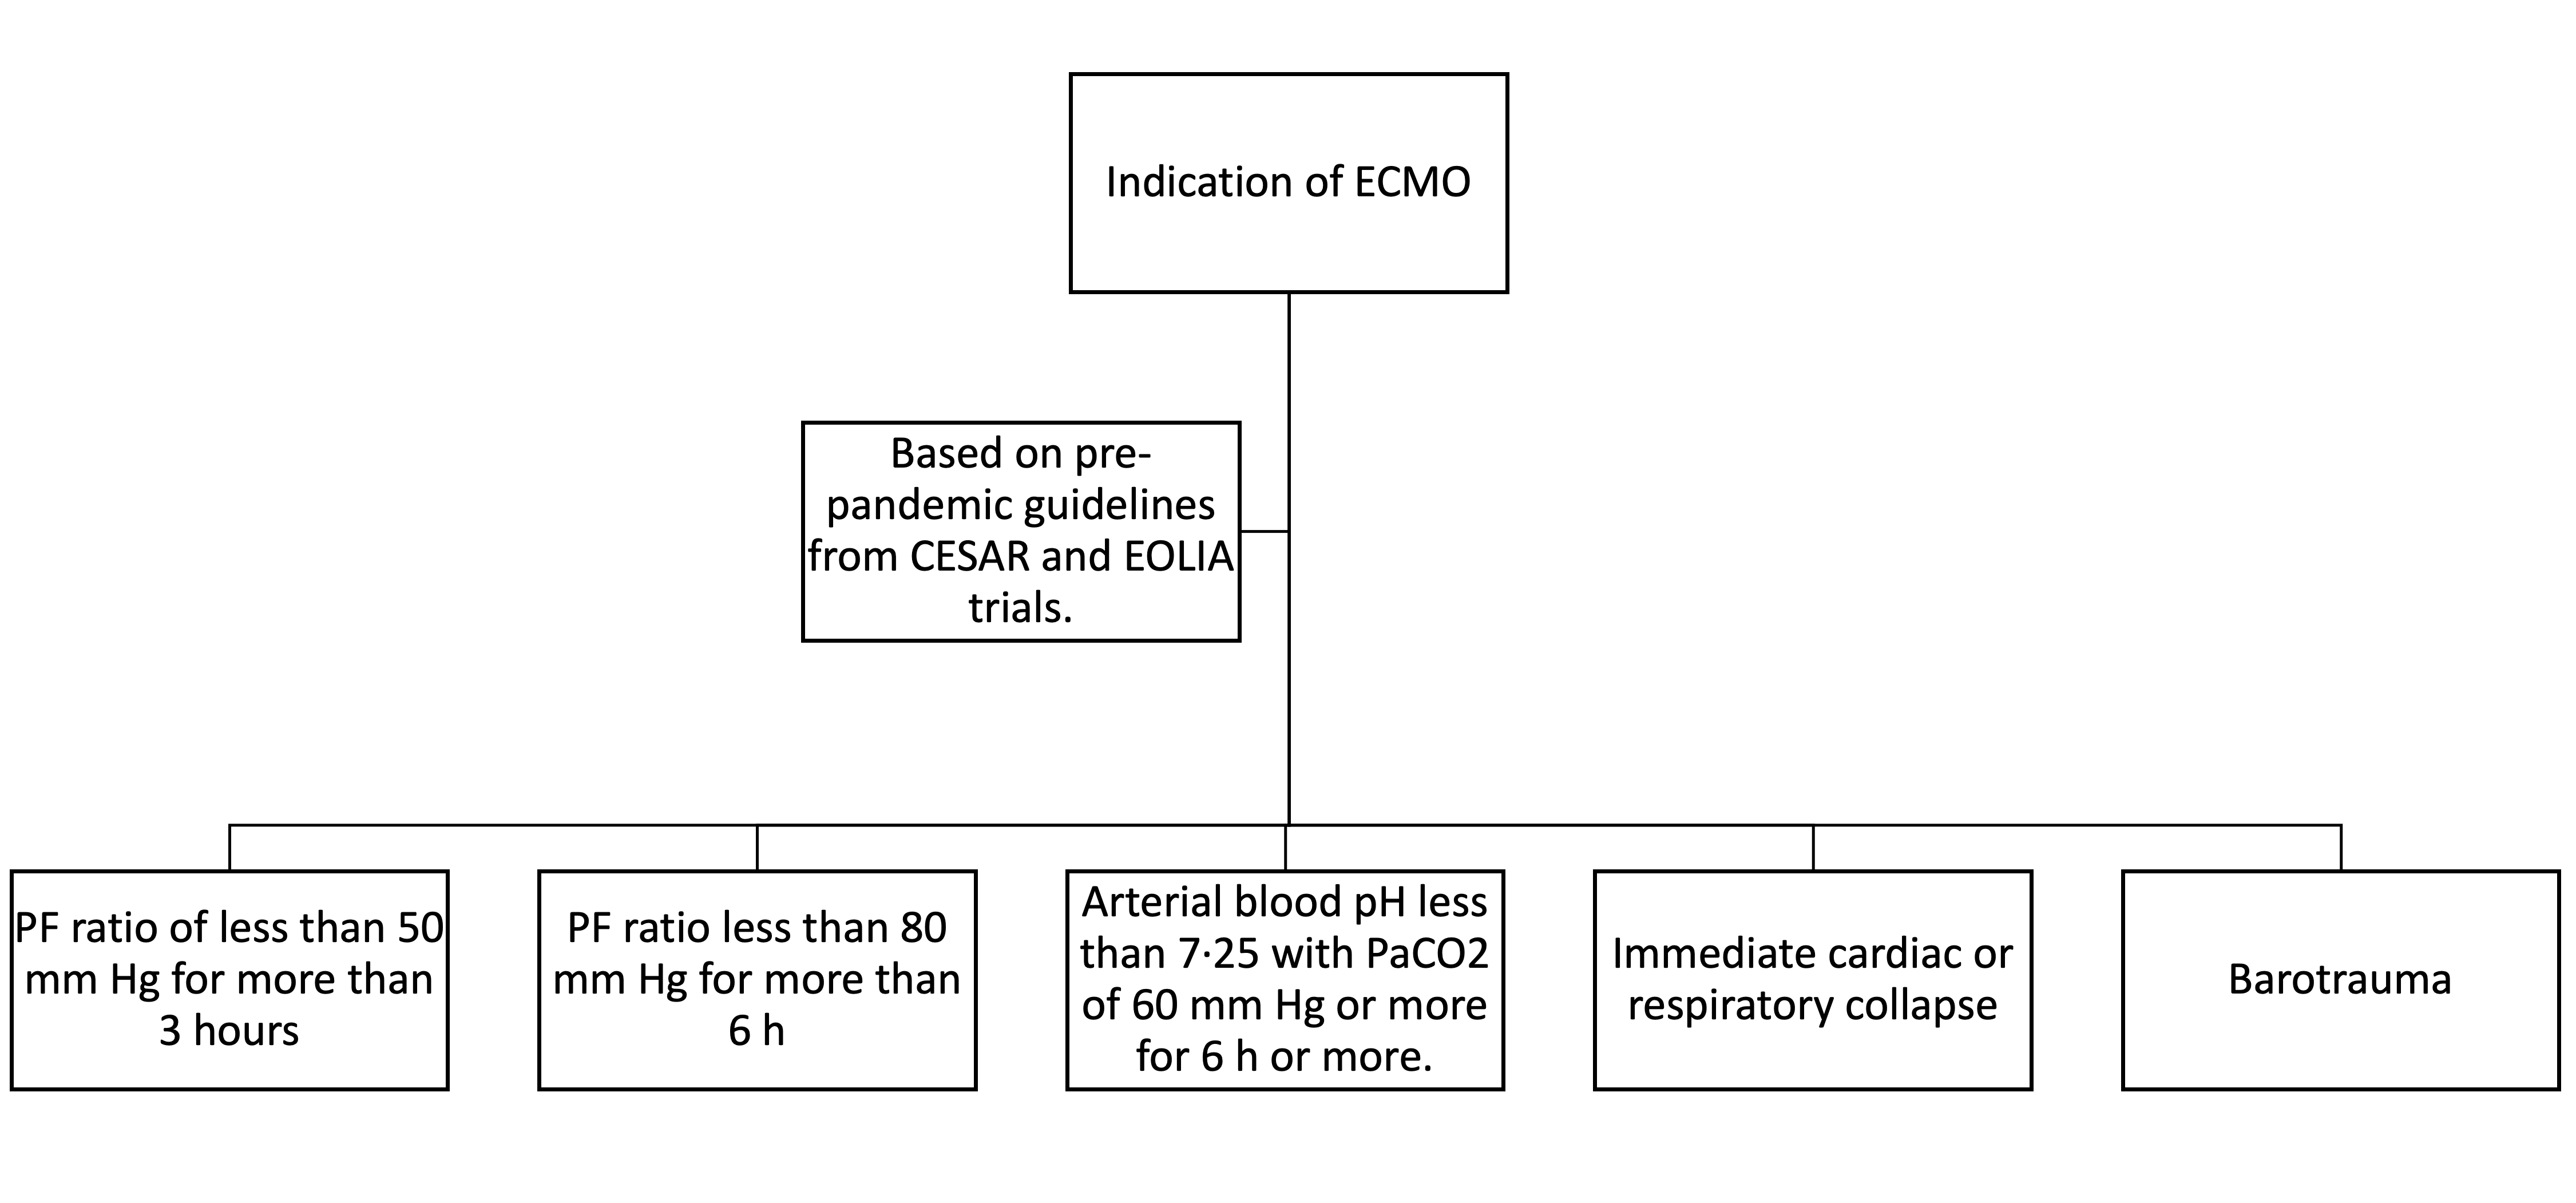 Figure 3: Indications of ECMO in COVID-19 ARDS